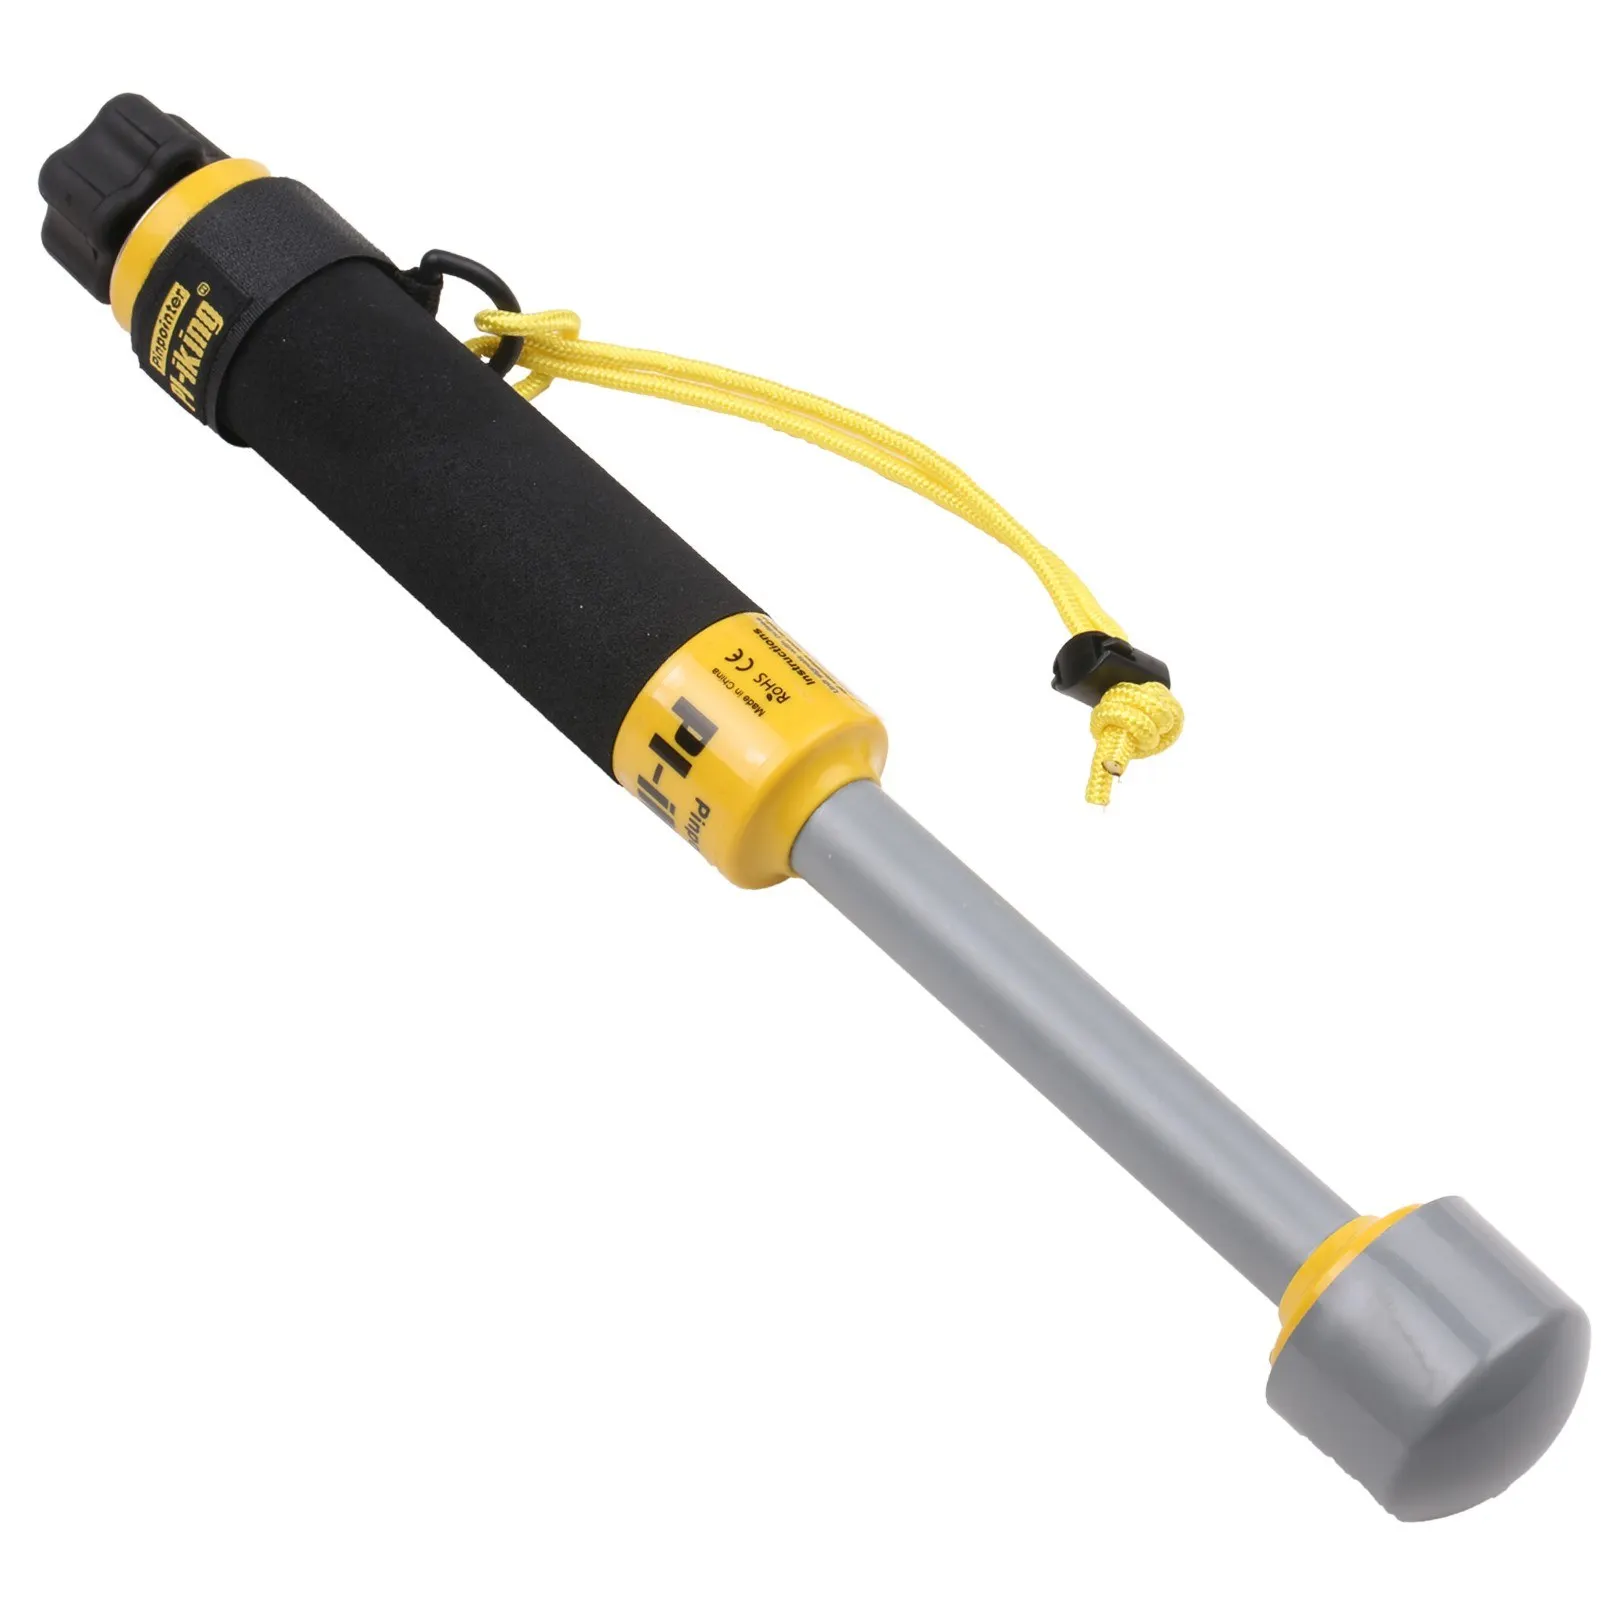 

100Feet Underwater Metal Detector Fully Waterproof Pin Pointer Handheld Pulse Induction Targeting with Vibration LED 740 Metal F